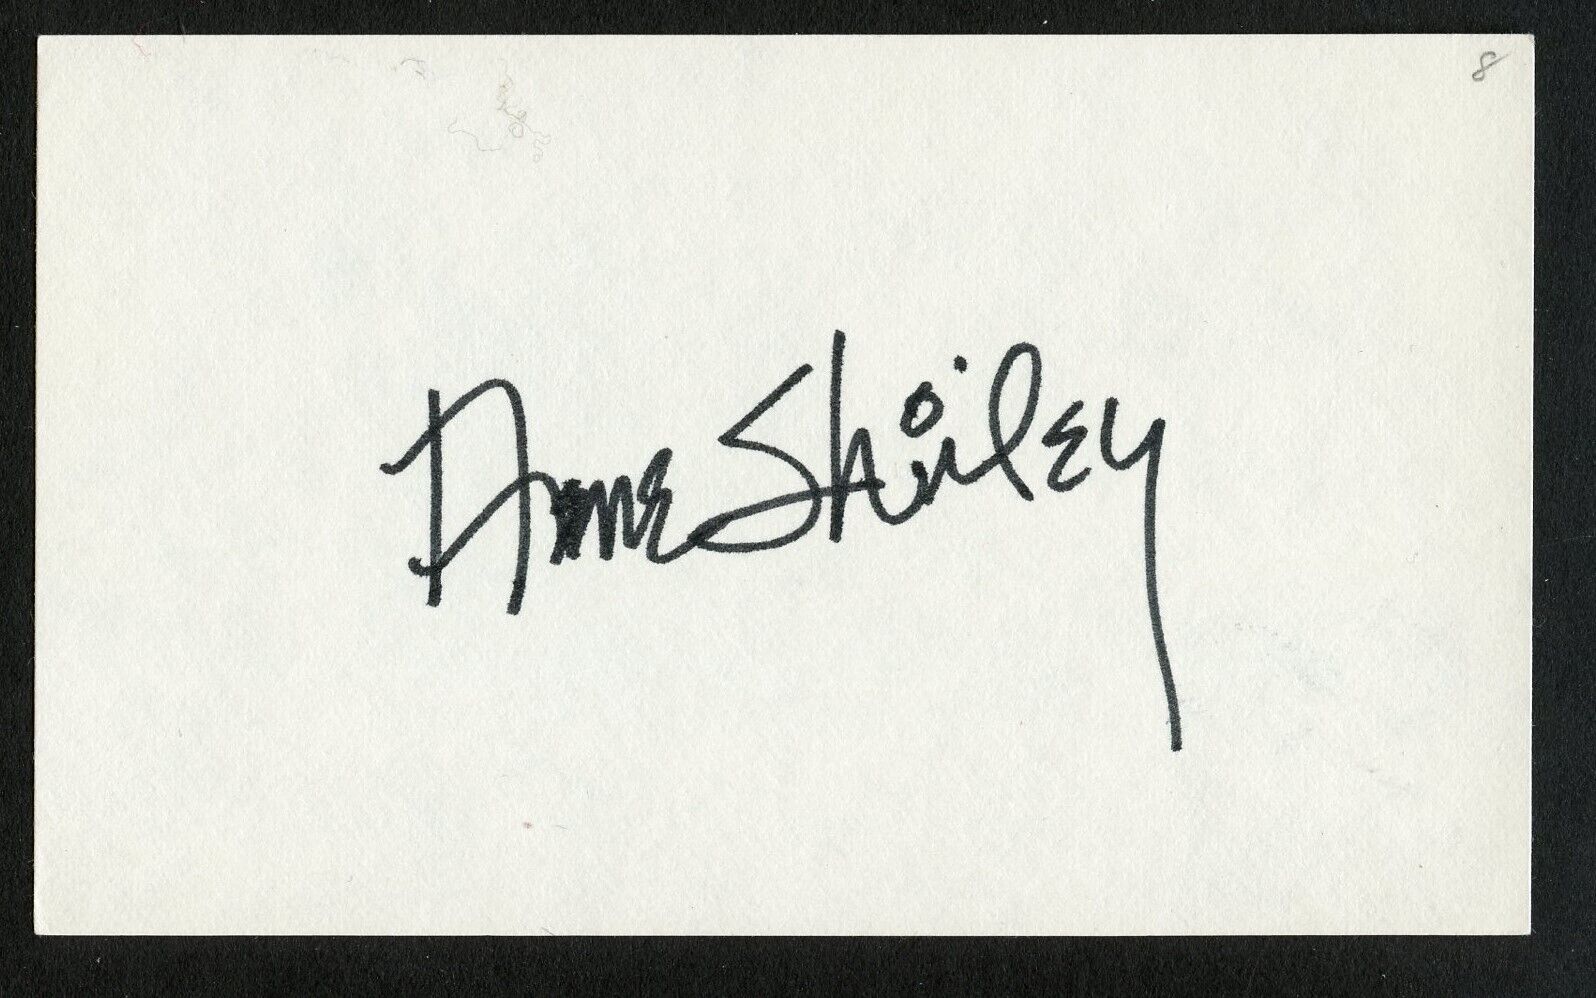 Anne Shirley d1993 signed autograph 3x5 Cut American Actress Anne of Green Gable